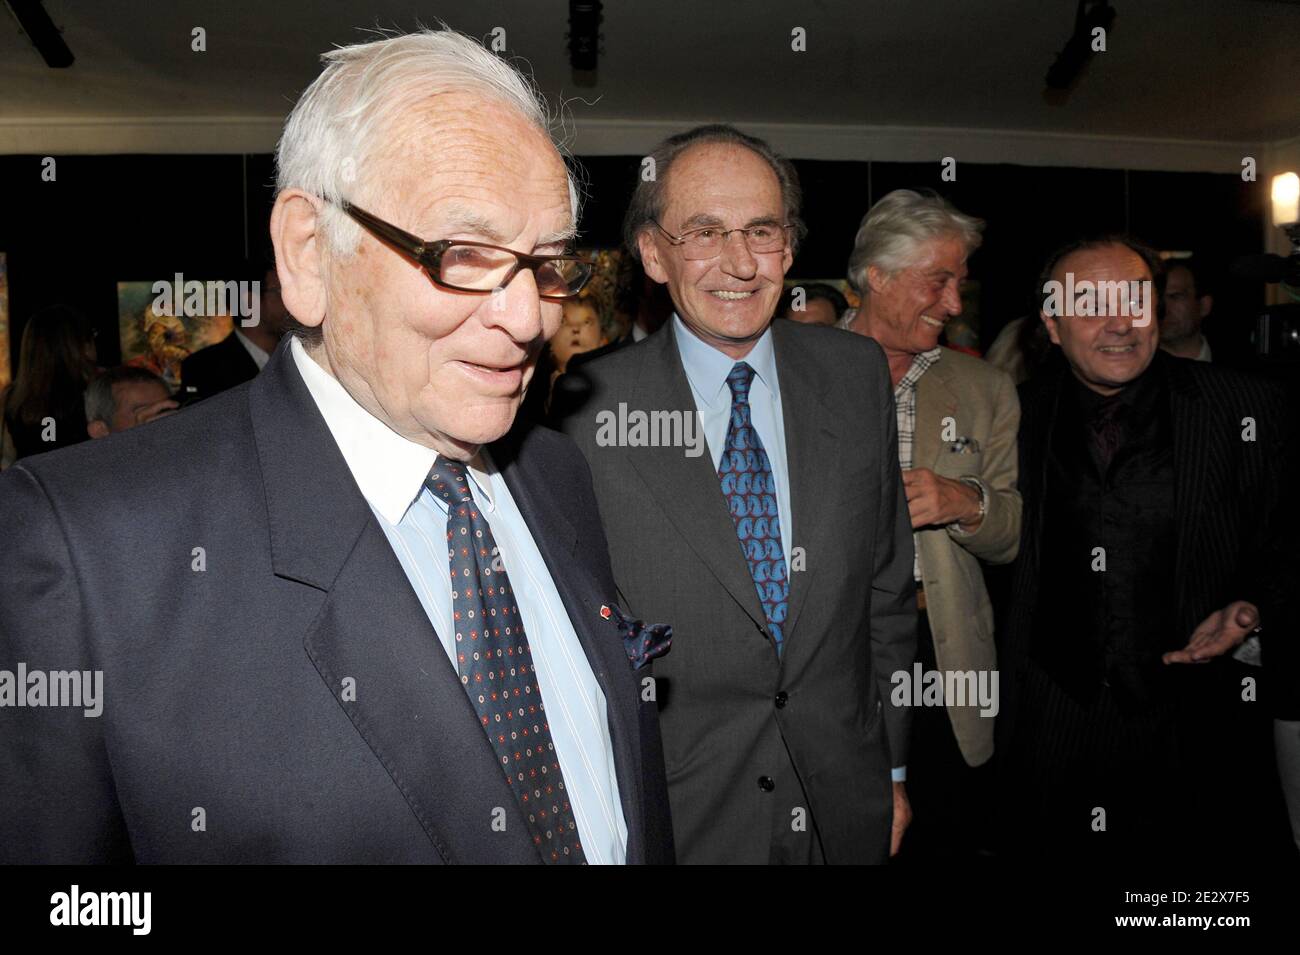 Pierre Cardin attending the opening of the 'Entente Subtile' painting exhibition by Pal Sarkozy and Werner Hornung at the Espace Pierre Cardin in Paris, France, on April 24, 2010. Photo by Giancarlo Gorassini/ABACAPRESS.COM Stock Photo